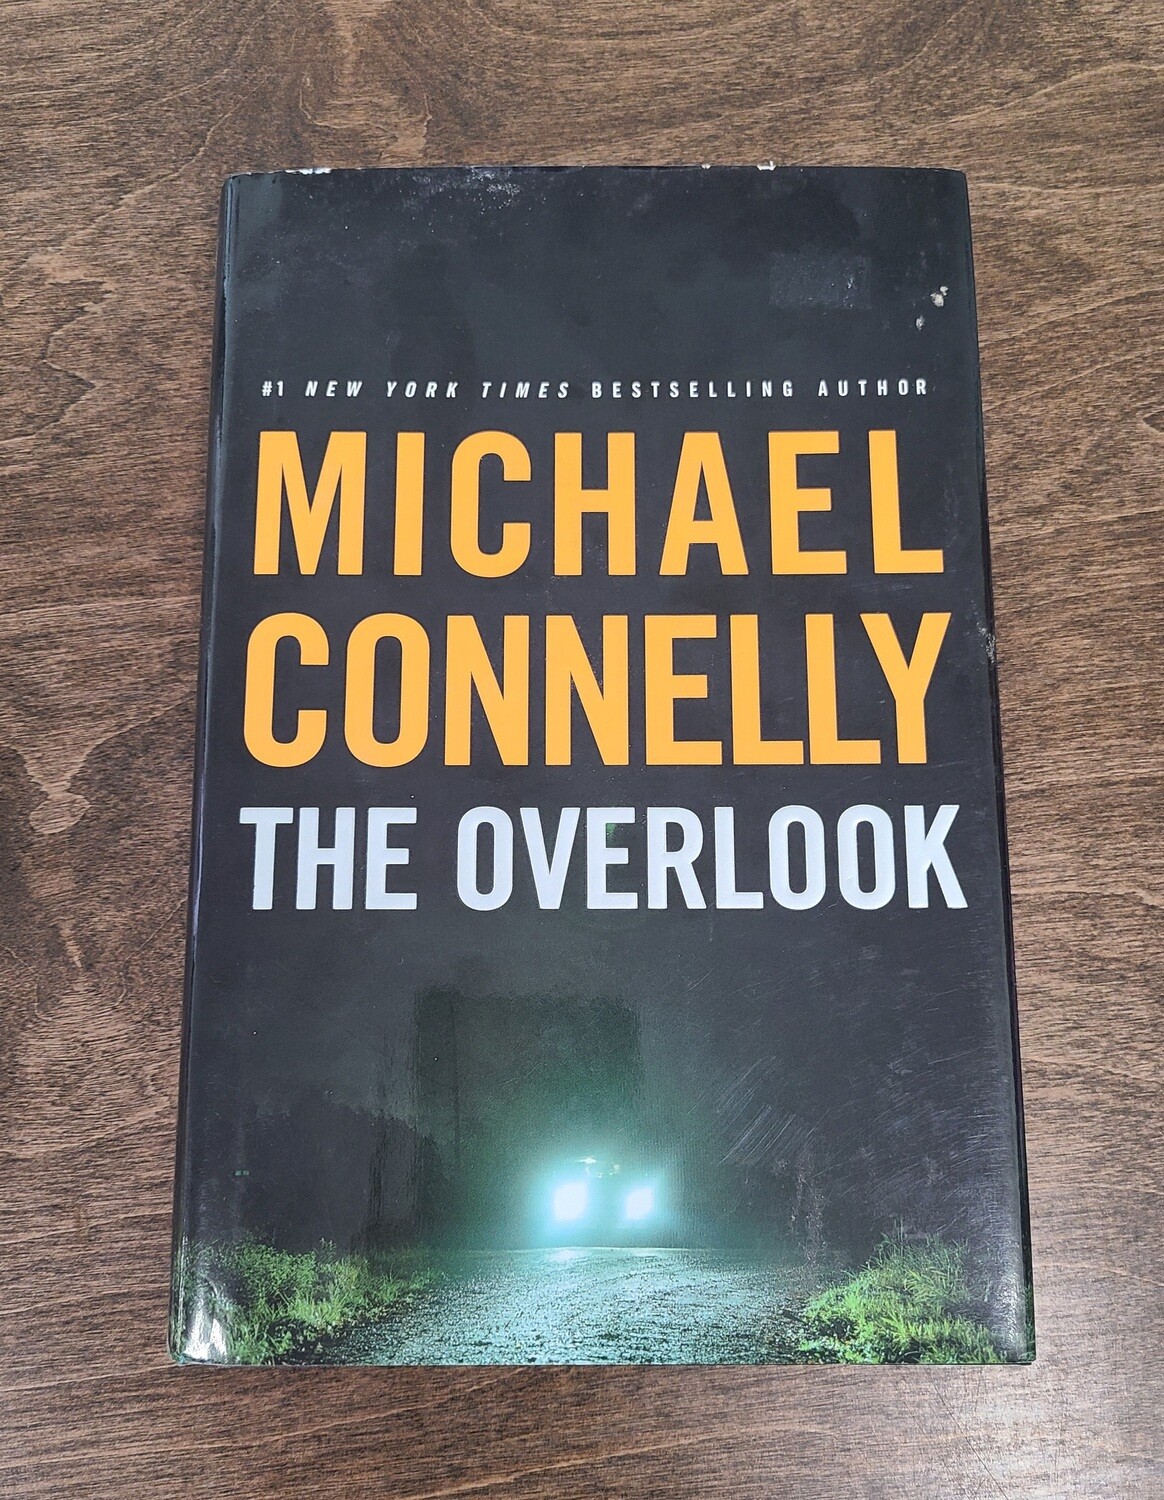 The Overlook by Michael Connelly